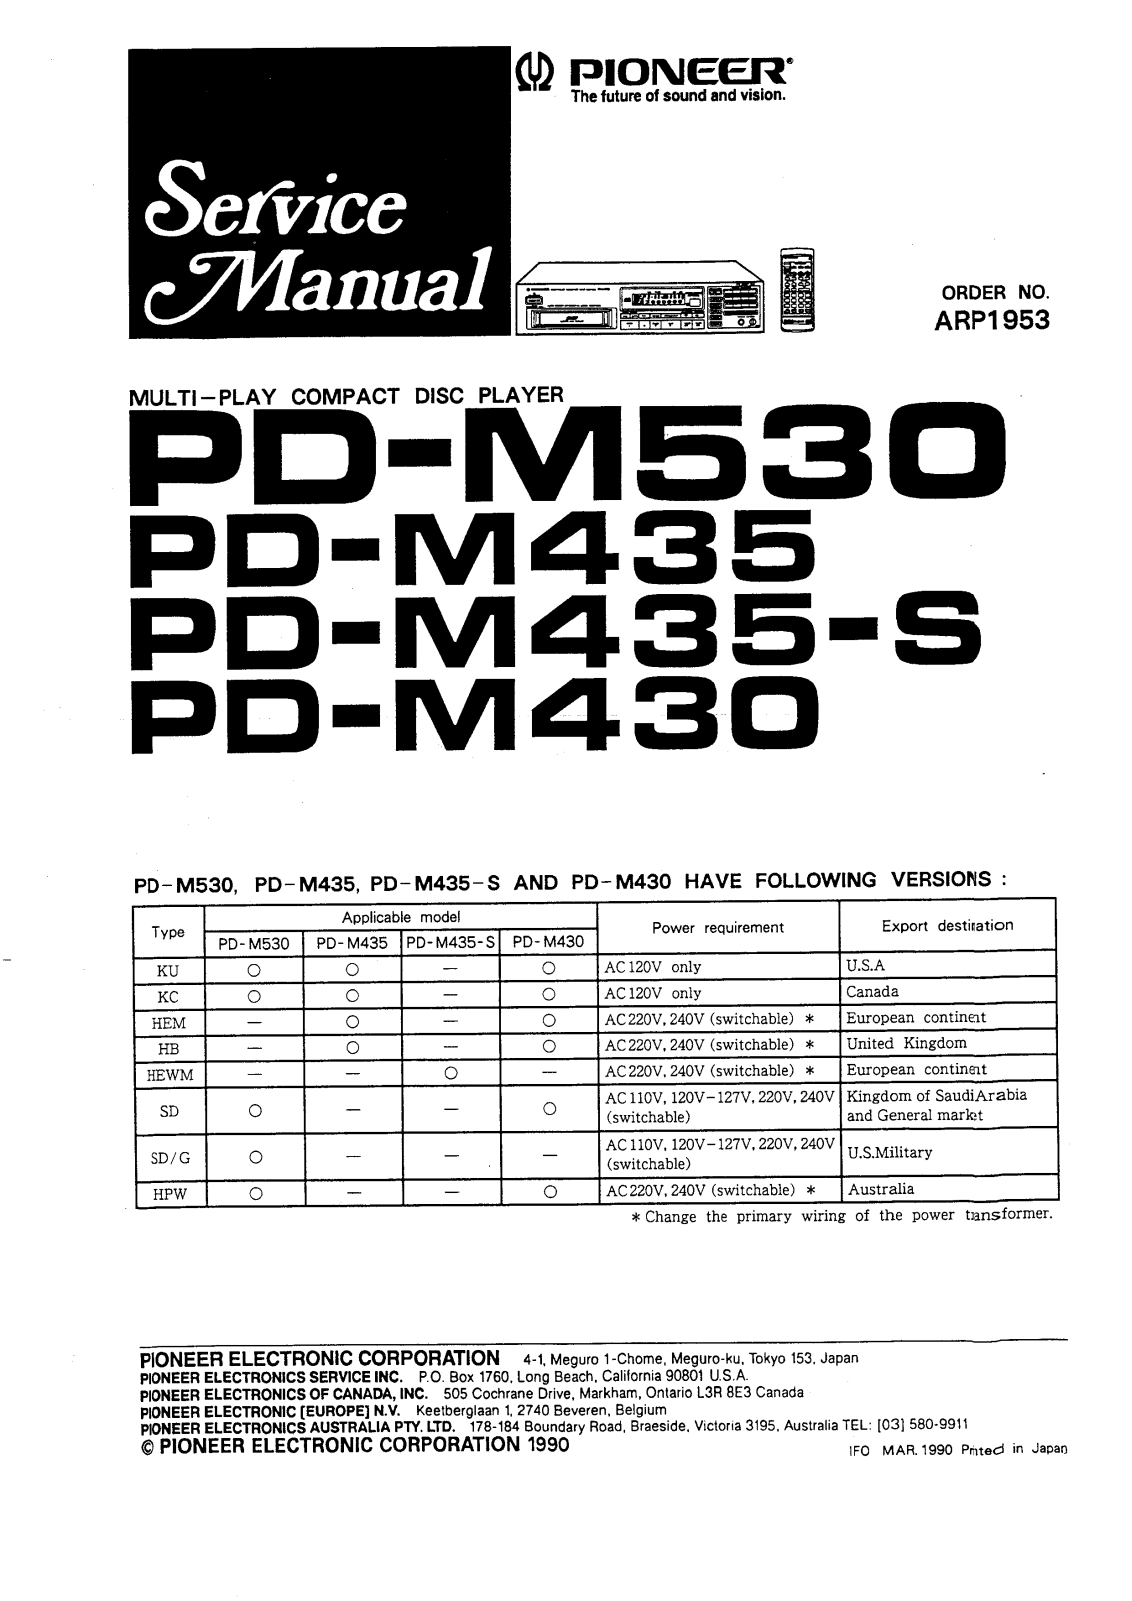 Pioneer PDM-430, PDM-435, PDM-435-S, PDM-530 Service manual